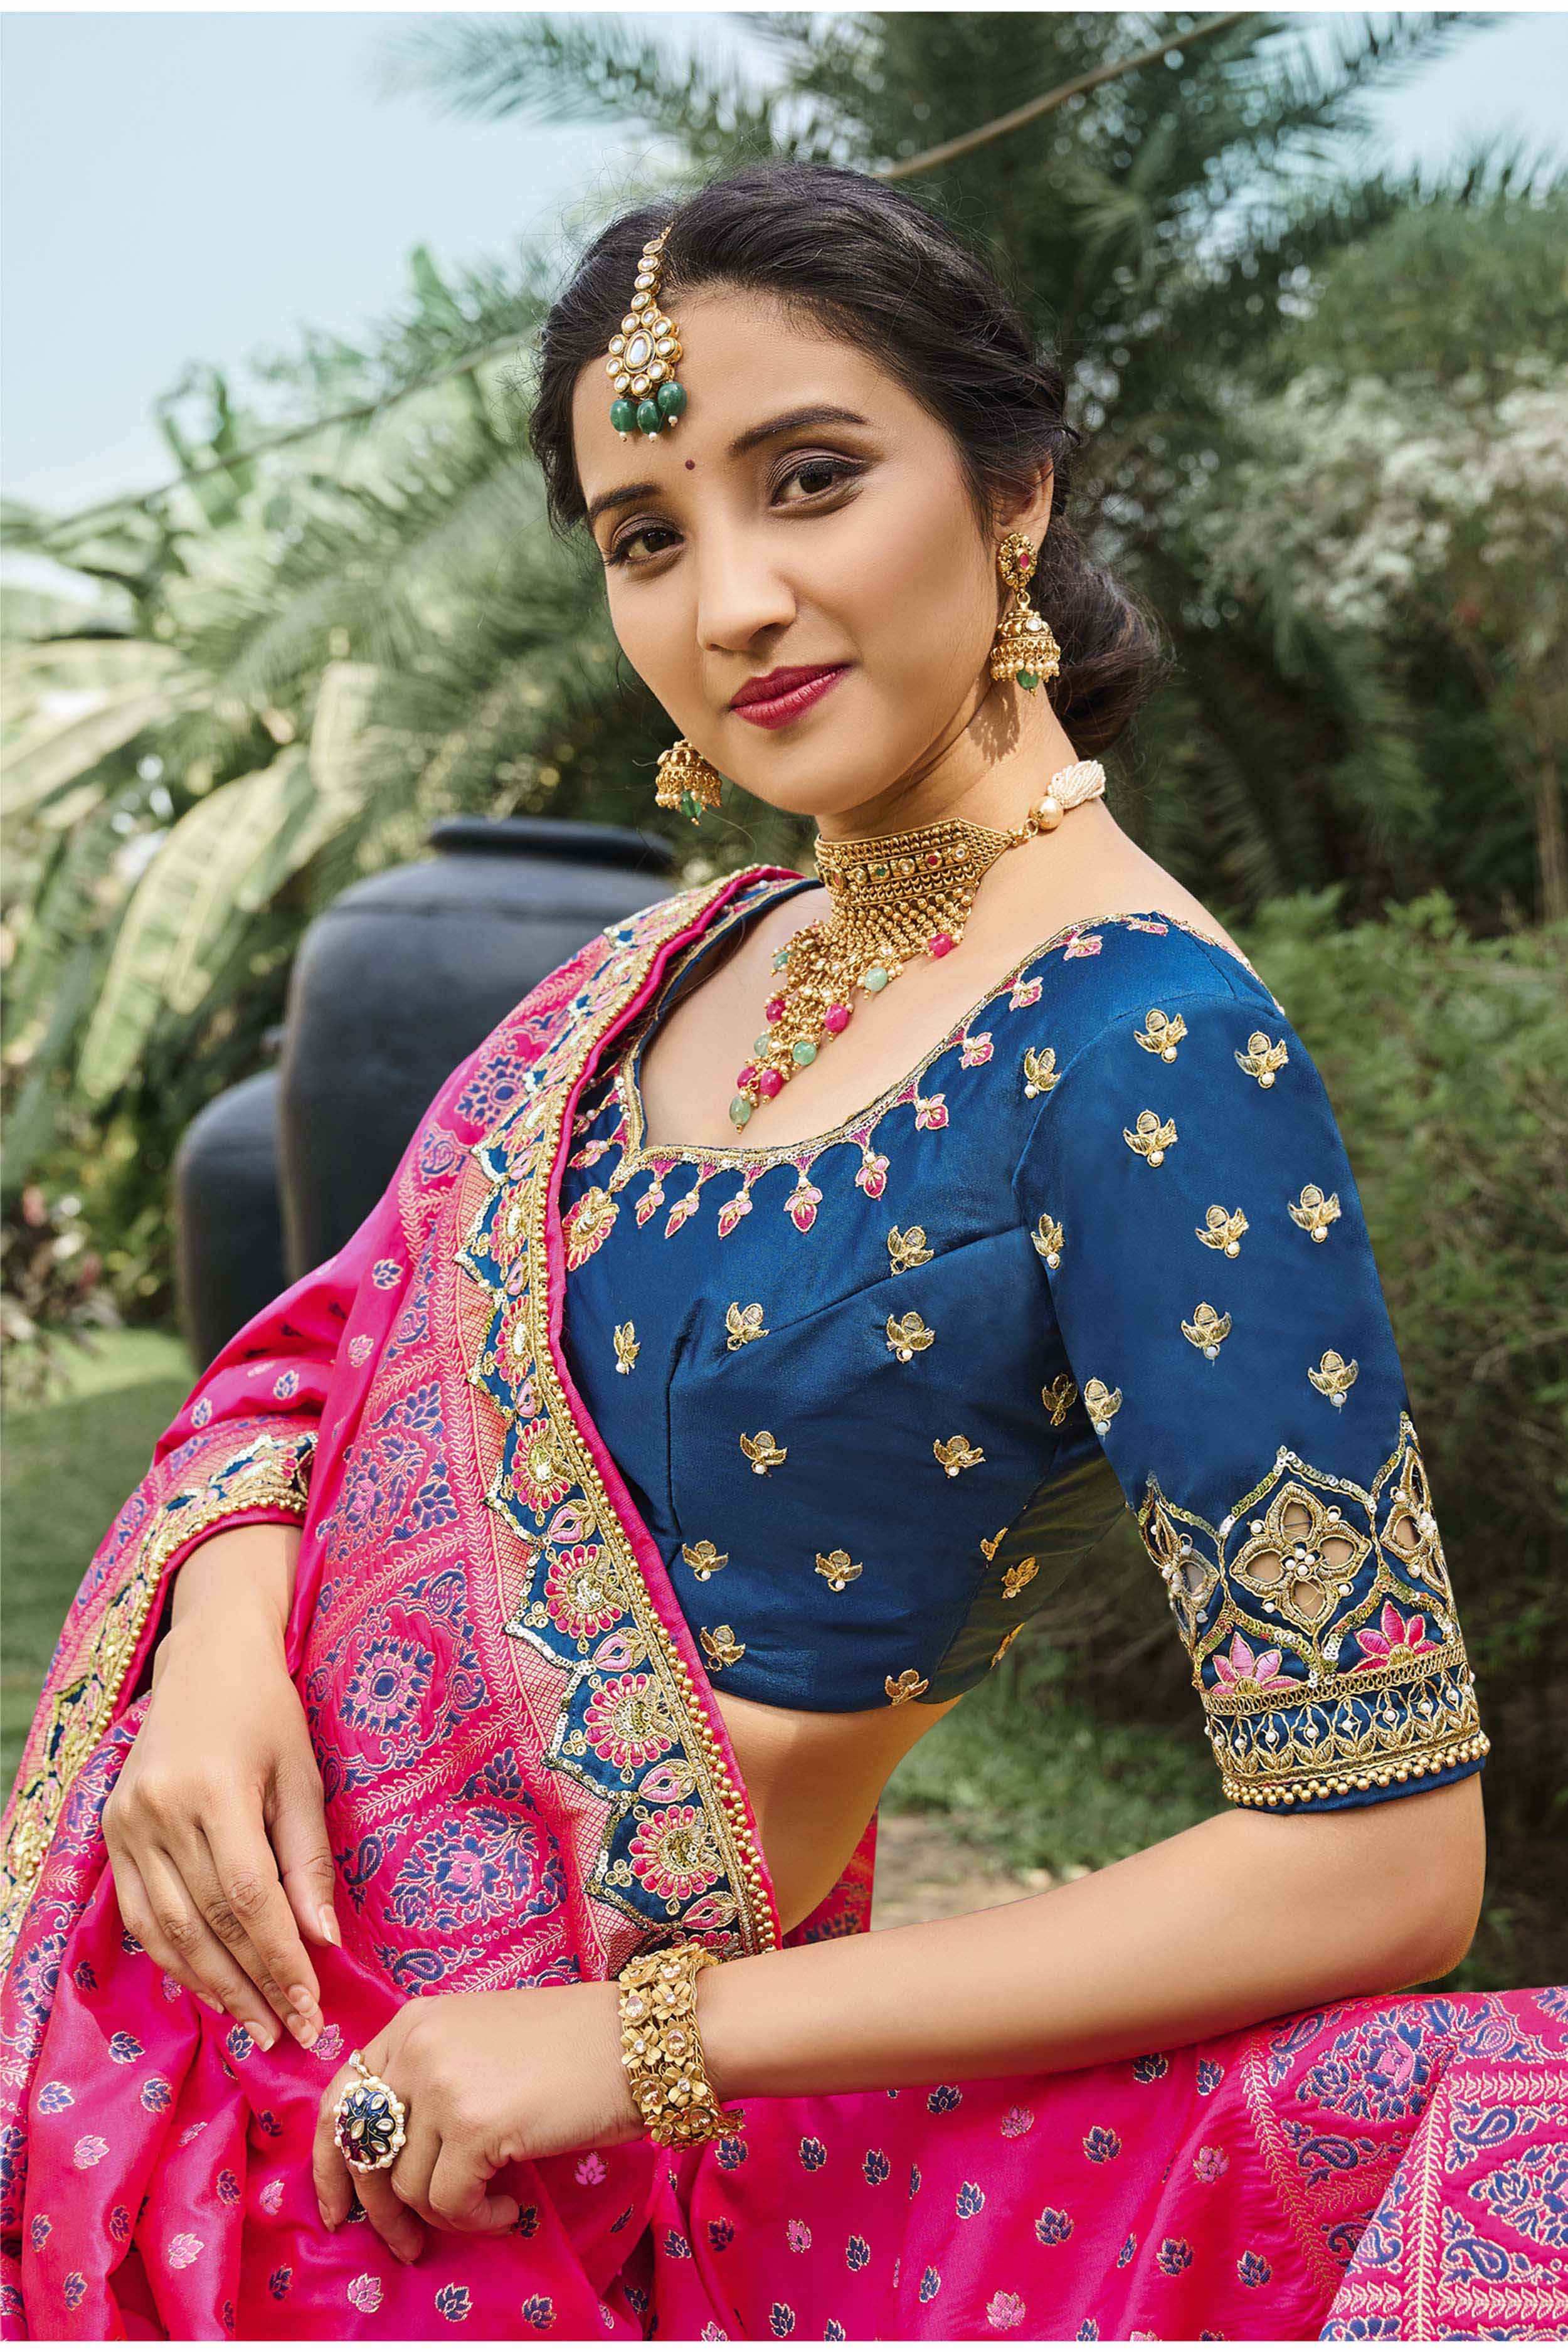 Banarasi Lehengas Are Exactly What You Should Wear For Your D-Day!